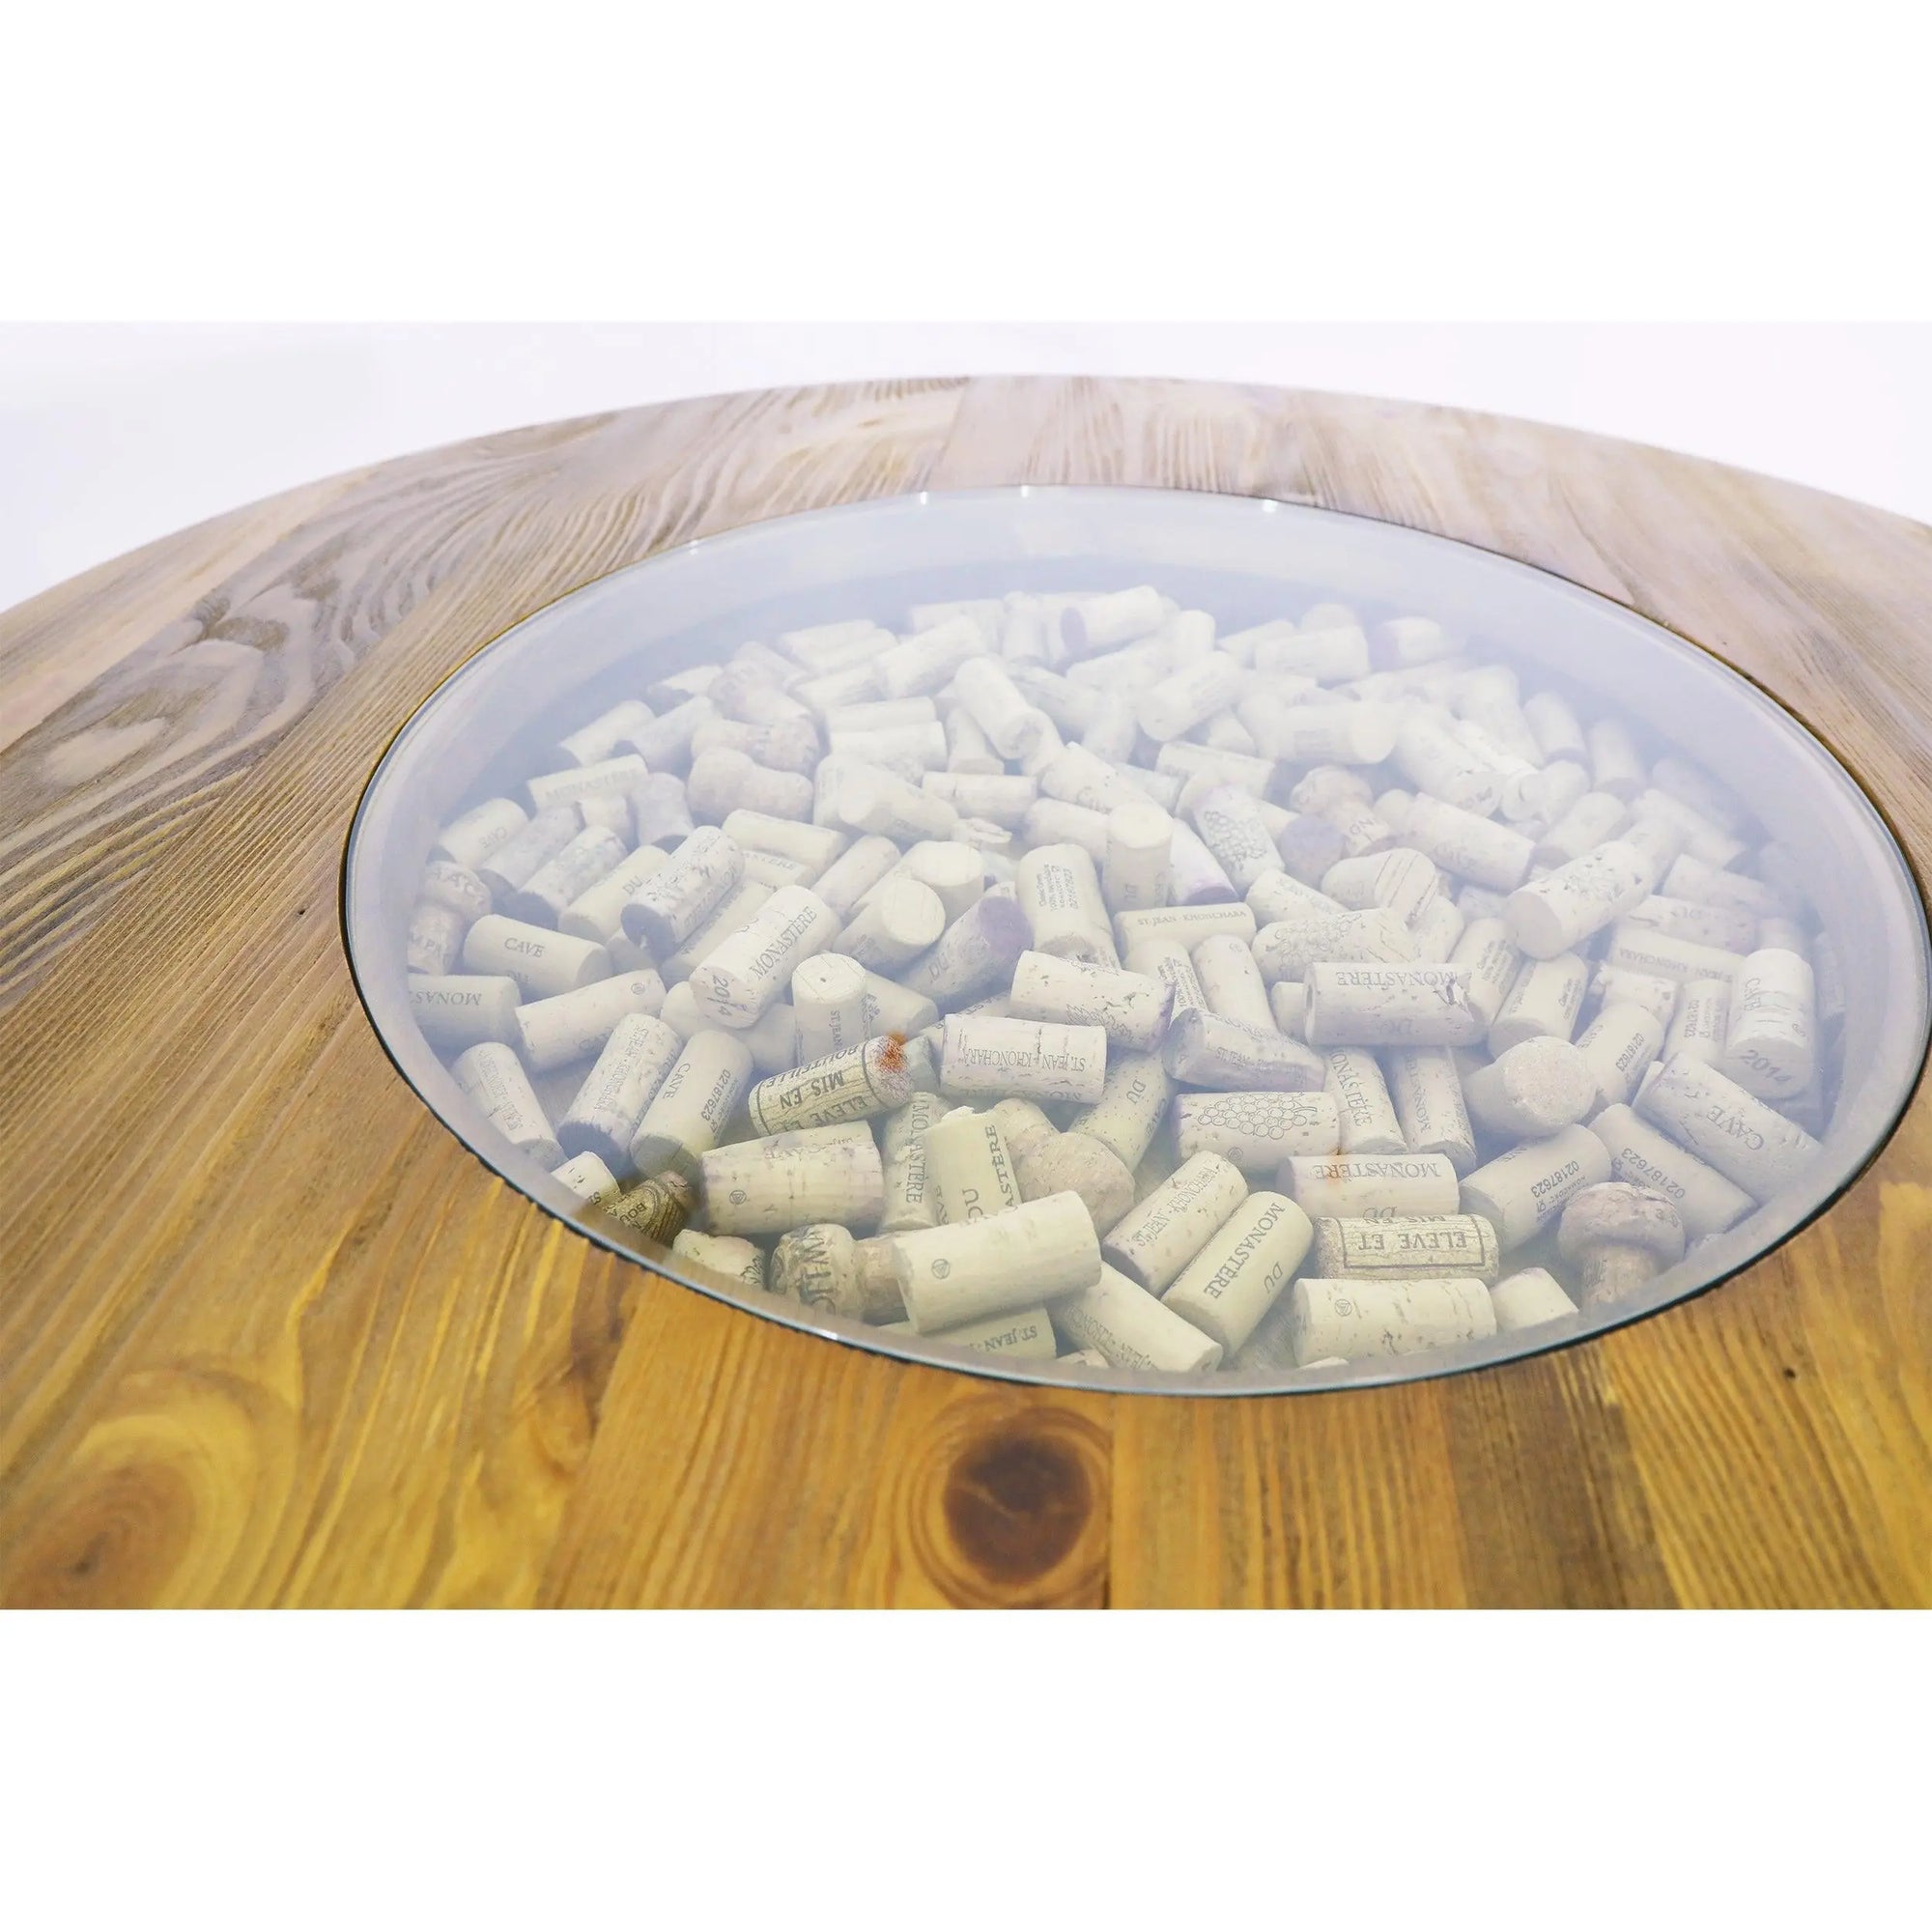 Round Wood-Glass Top (Top Only) - Oak Wood Wine Barrels. wine barrel coffee table barrel glass top wine barrel glass top whiskey barrel glass top bourbon barrel glass top barrel coffee table barrel wine rack wine barrel table whiskey barrel whiskey barrel table wine barrel handma